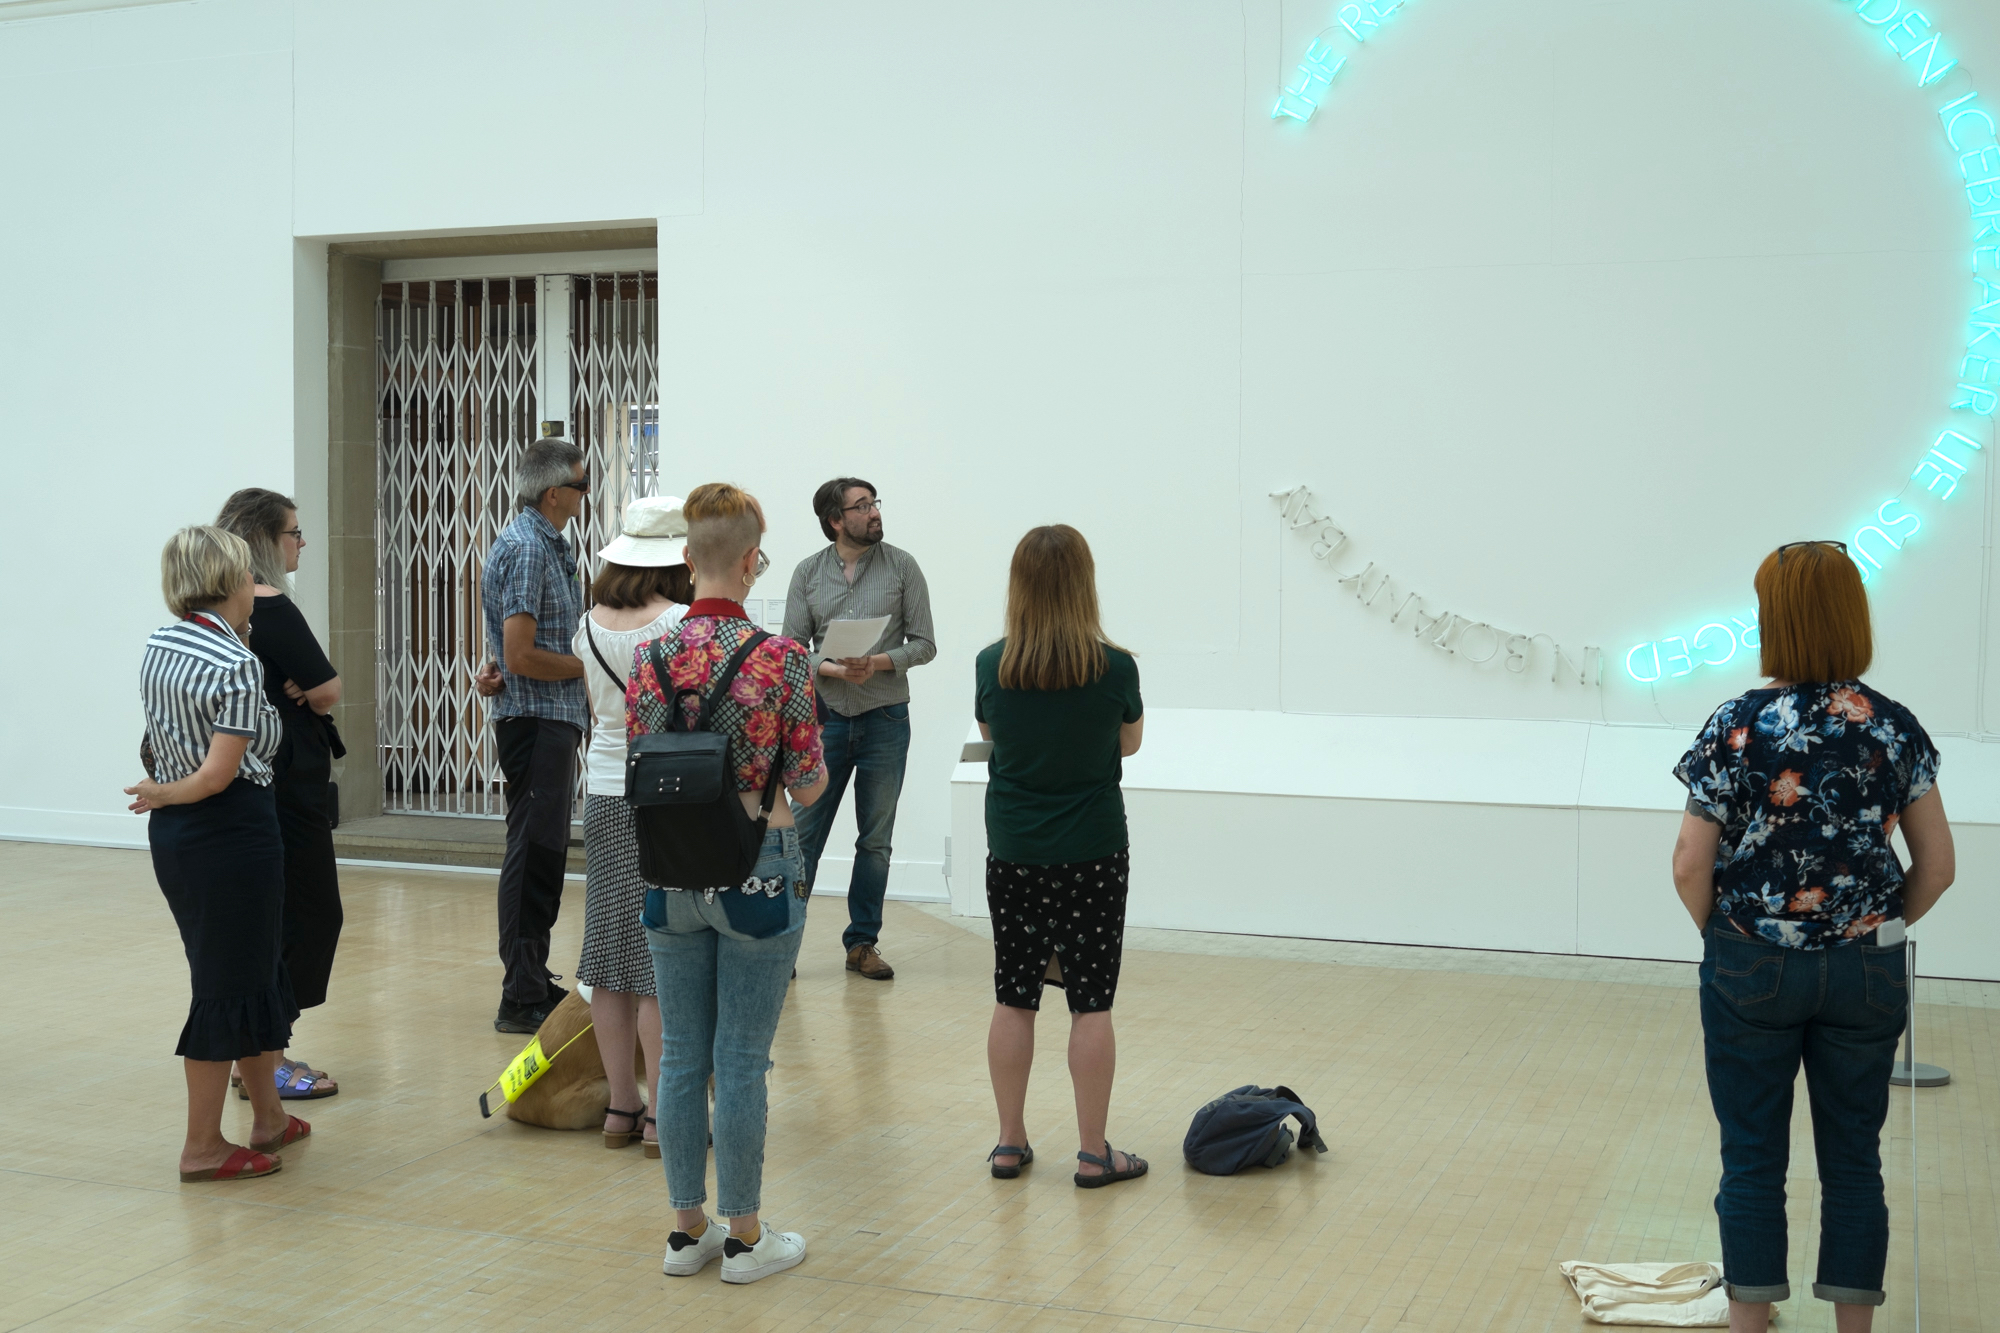 People gather in a gallery space for a performance.